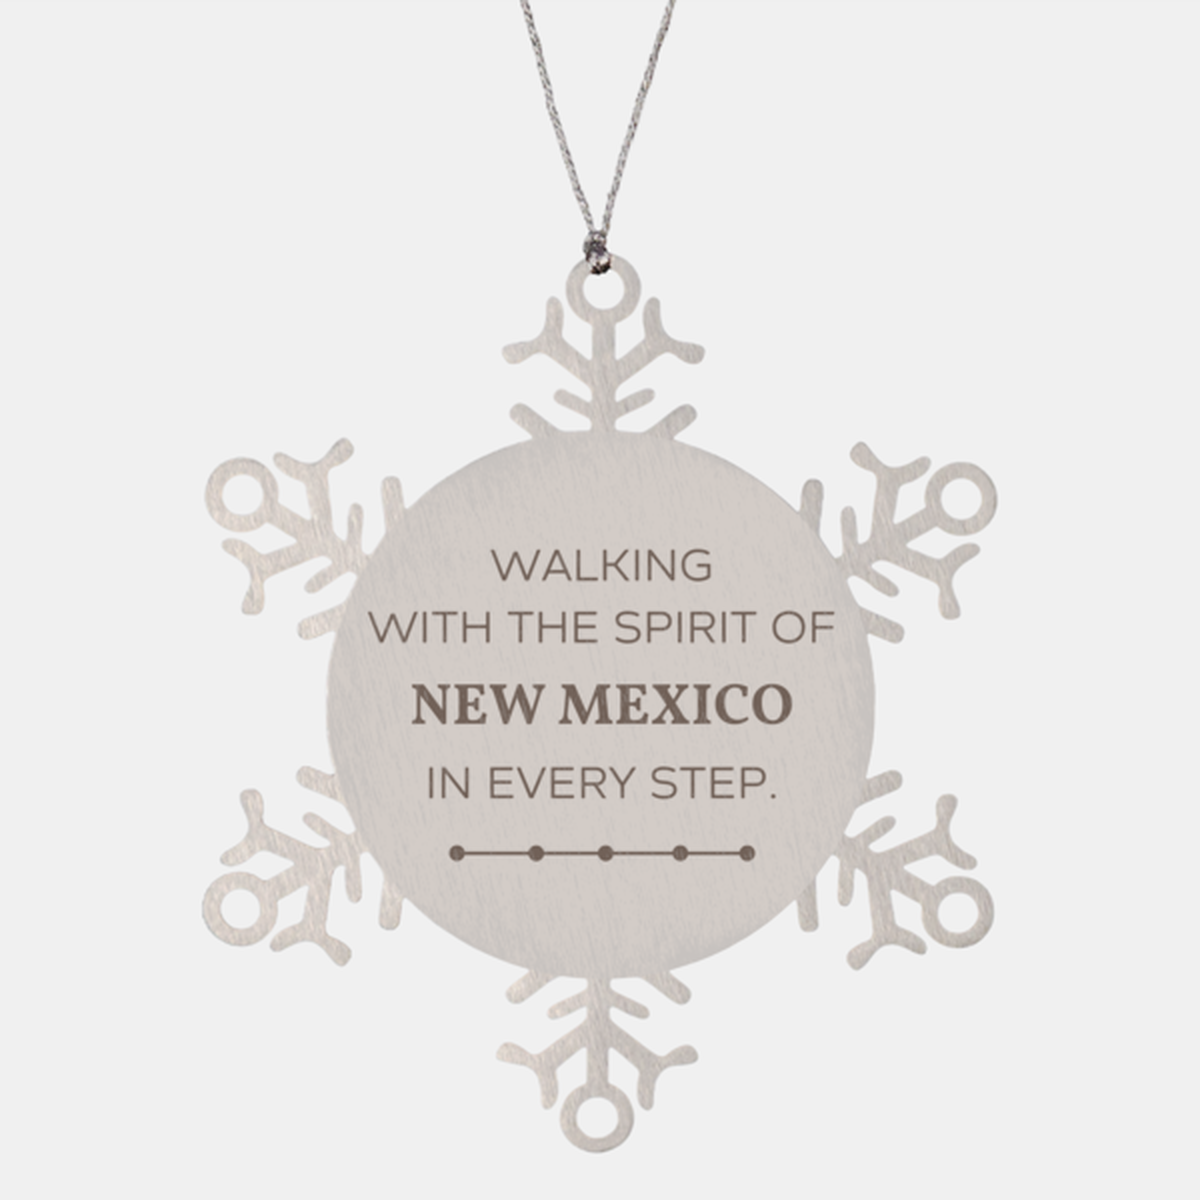 New Mexico Gifts, Walking with the spirit, Love New Mexico Birthday Christmas Snowflake Ornament For New Mexico People, Men, Women, Friends